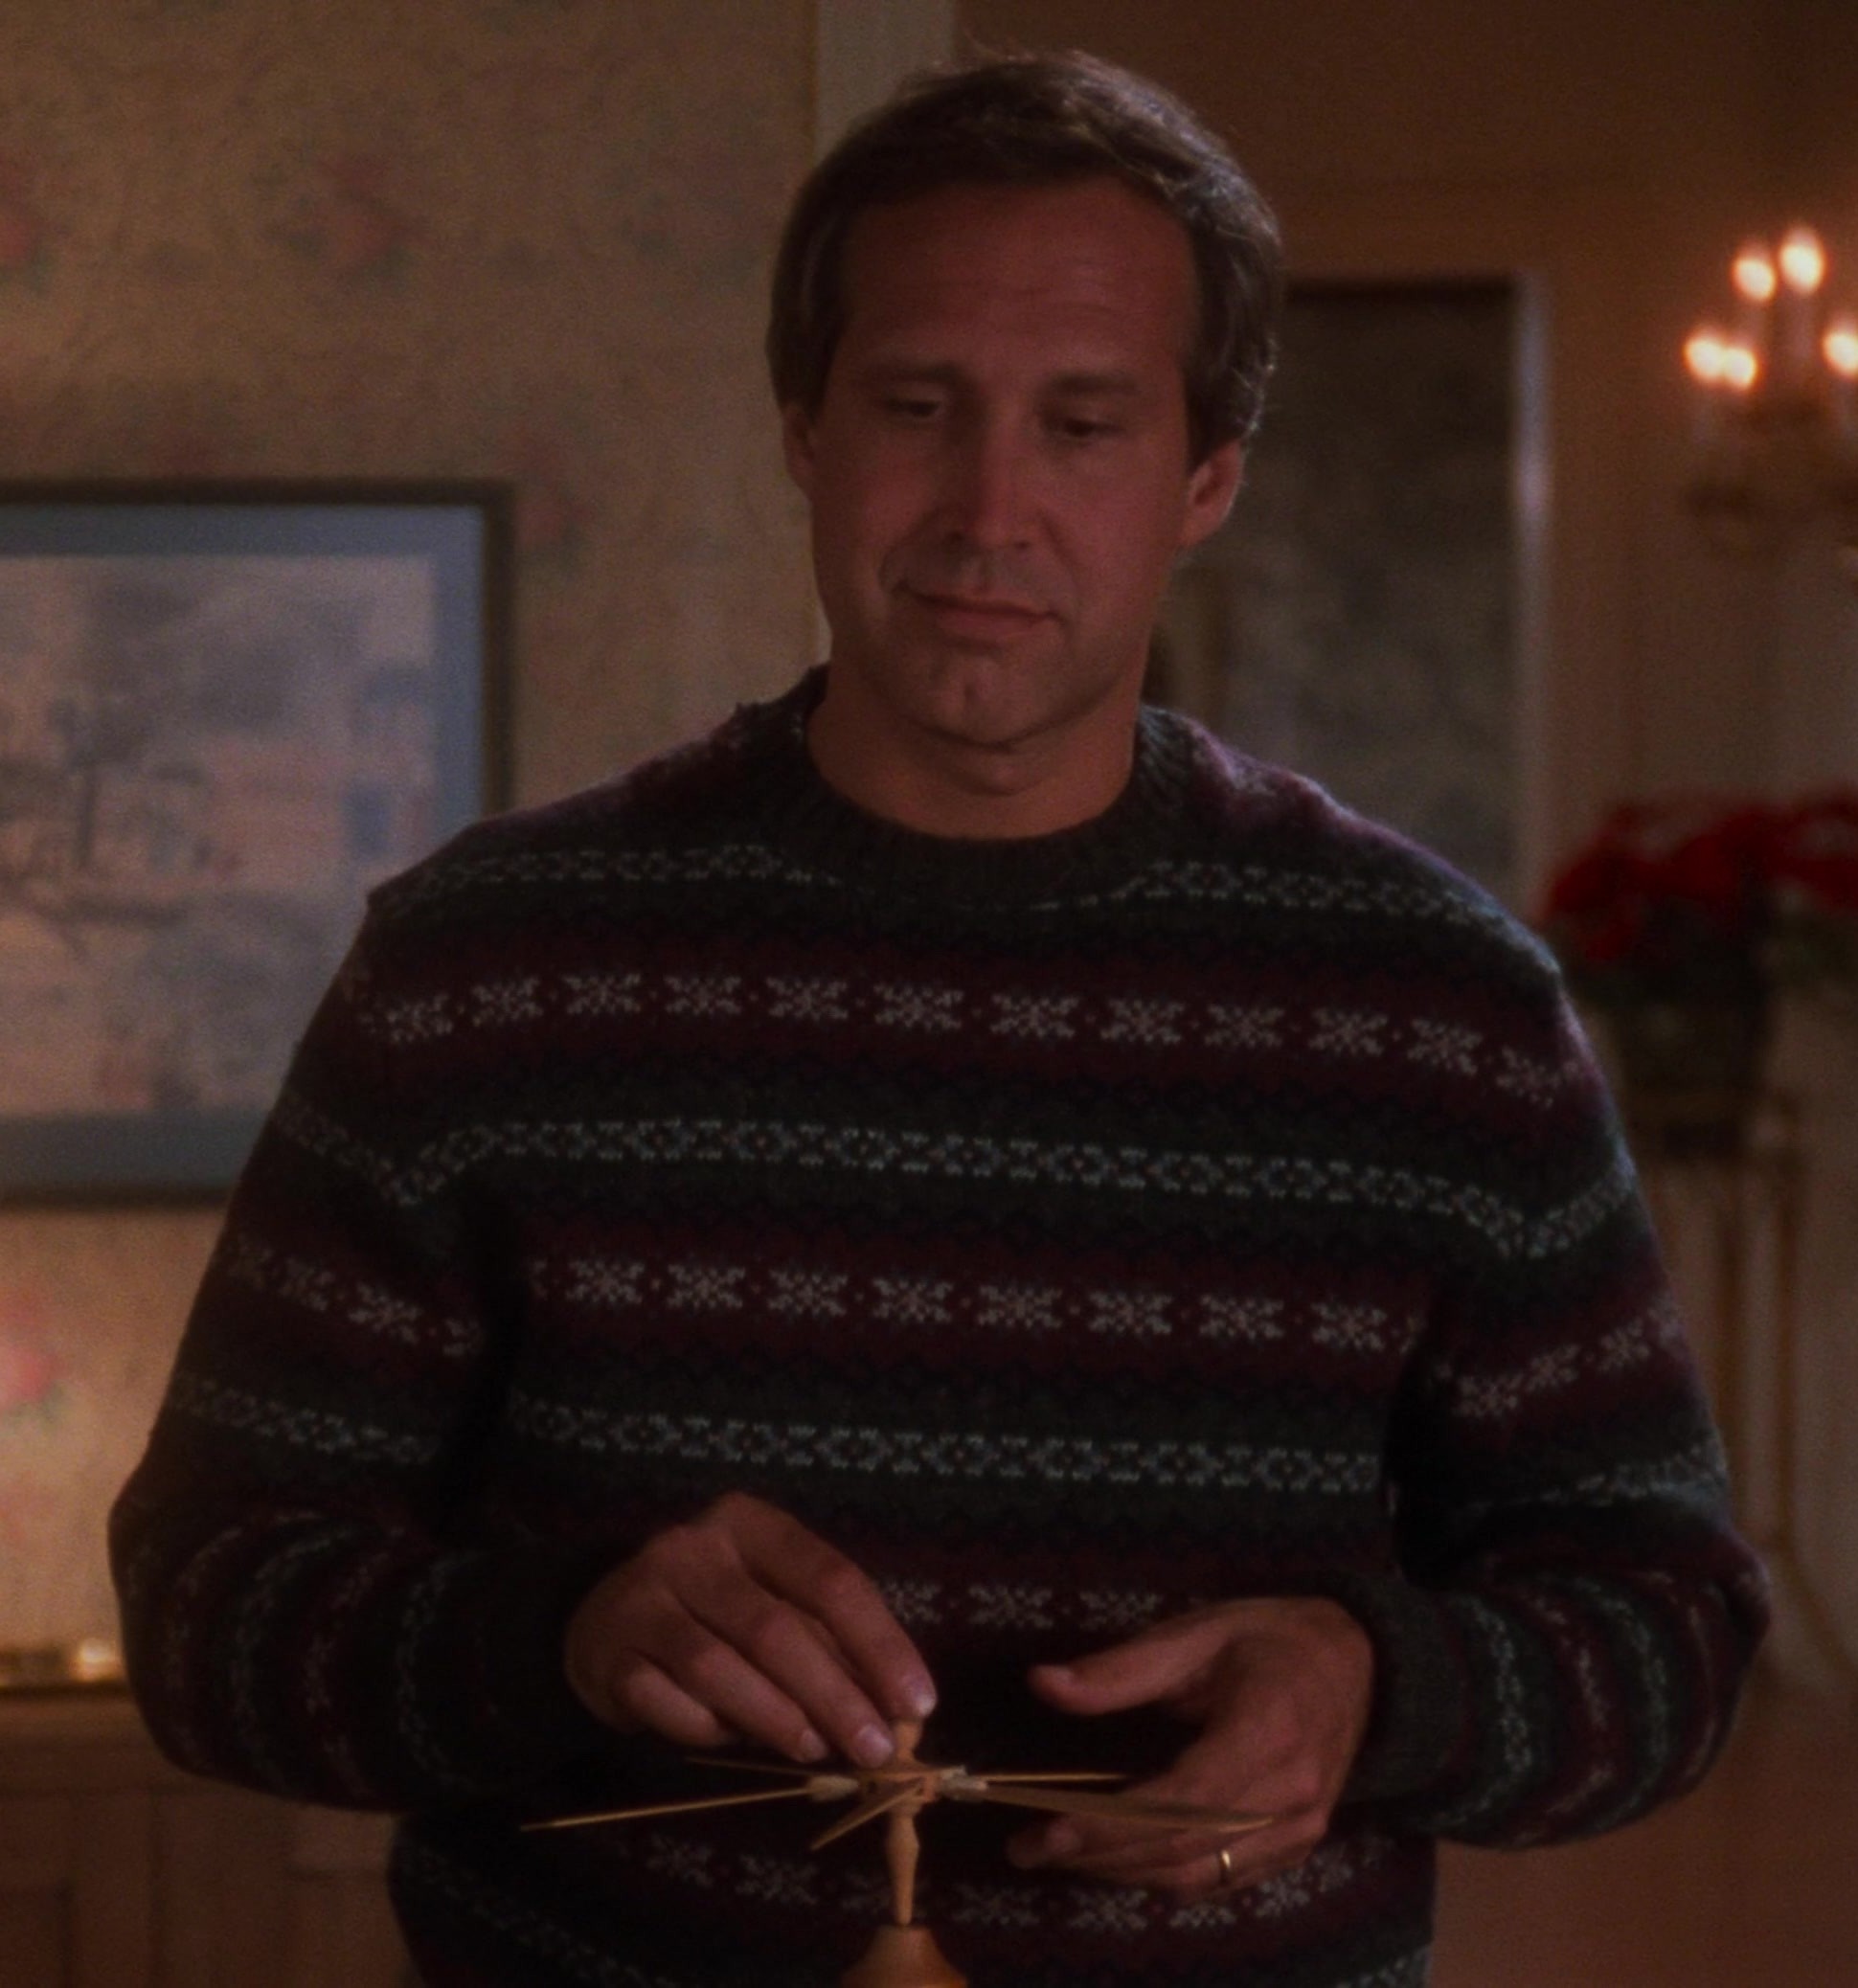 Worn on National Lampoon's Christmas Vacation (1989) Movie - Snowflake Christmas Knit Sweater of Chevy Chase as Clark W. "Sparky" Griswold Jr.